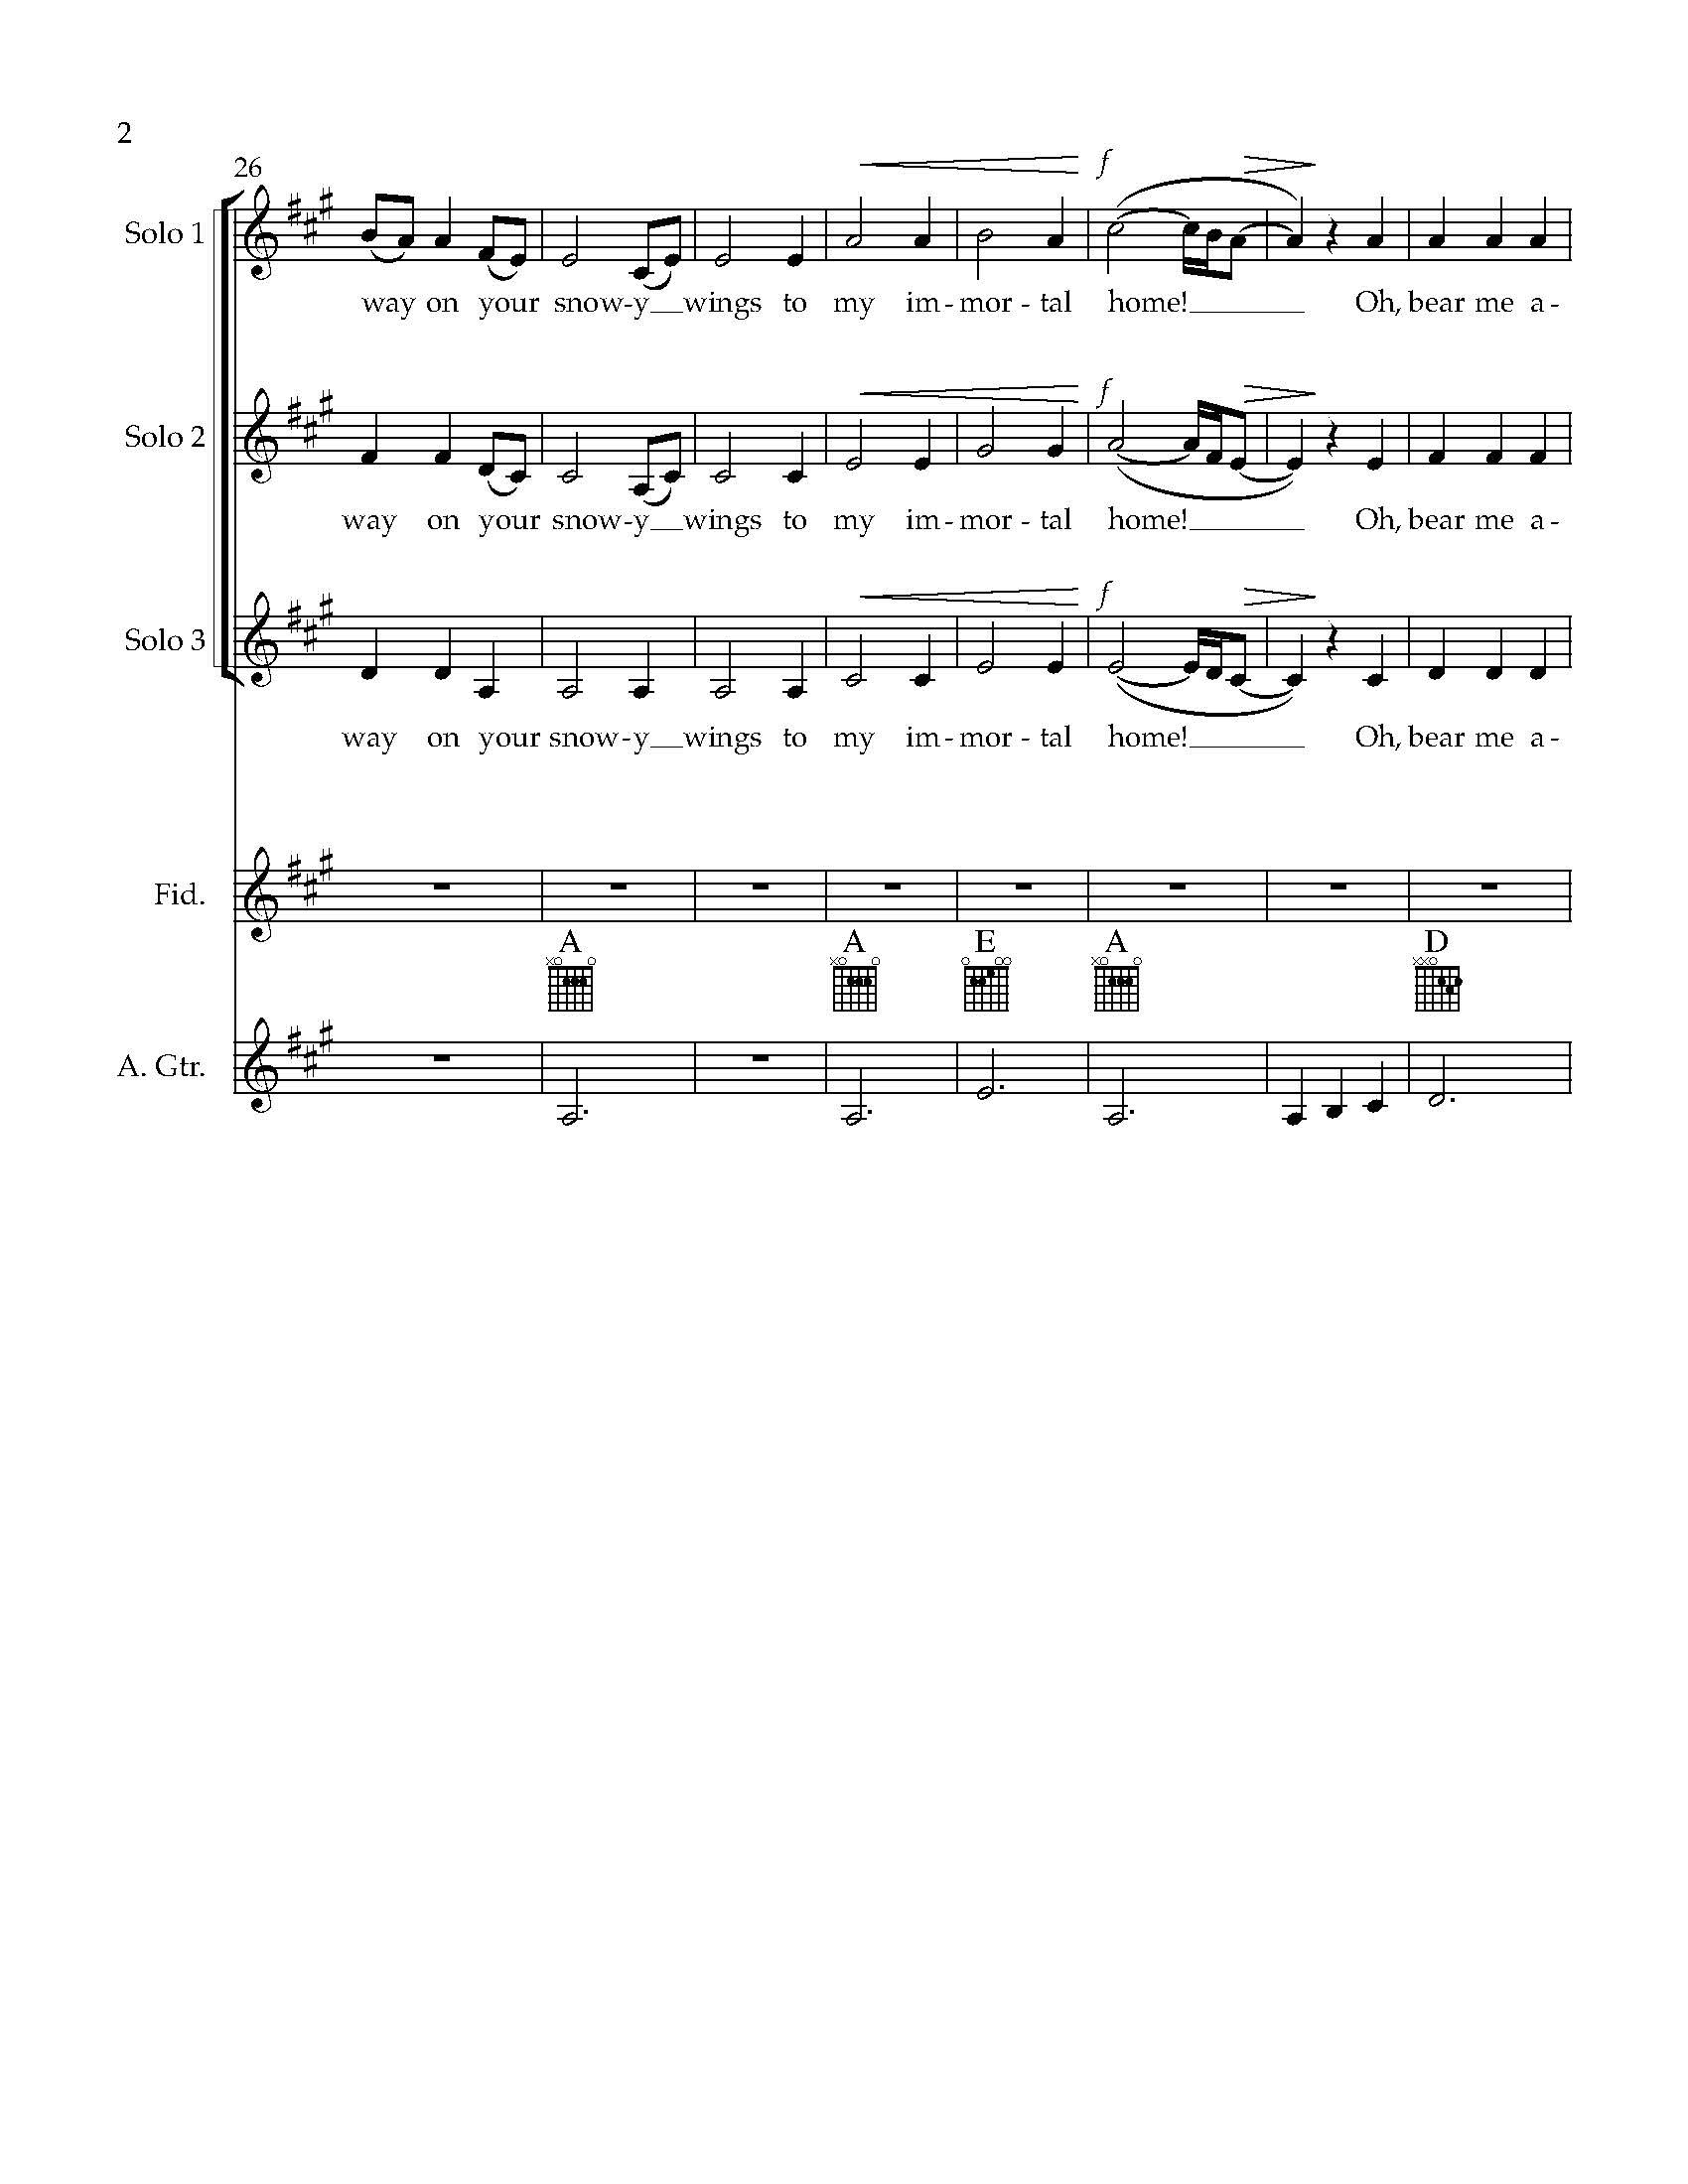 FULL SCORE preview - Angel Band for choir, fiddle, piano, guitar, and bass - arr_Page_02.jpg